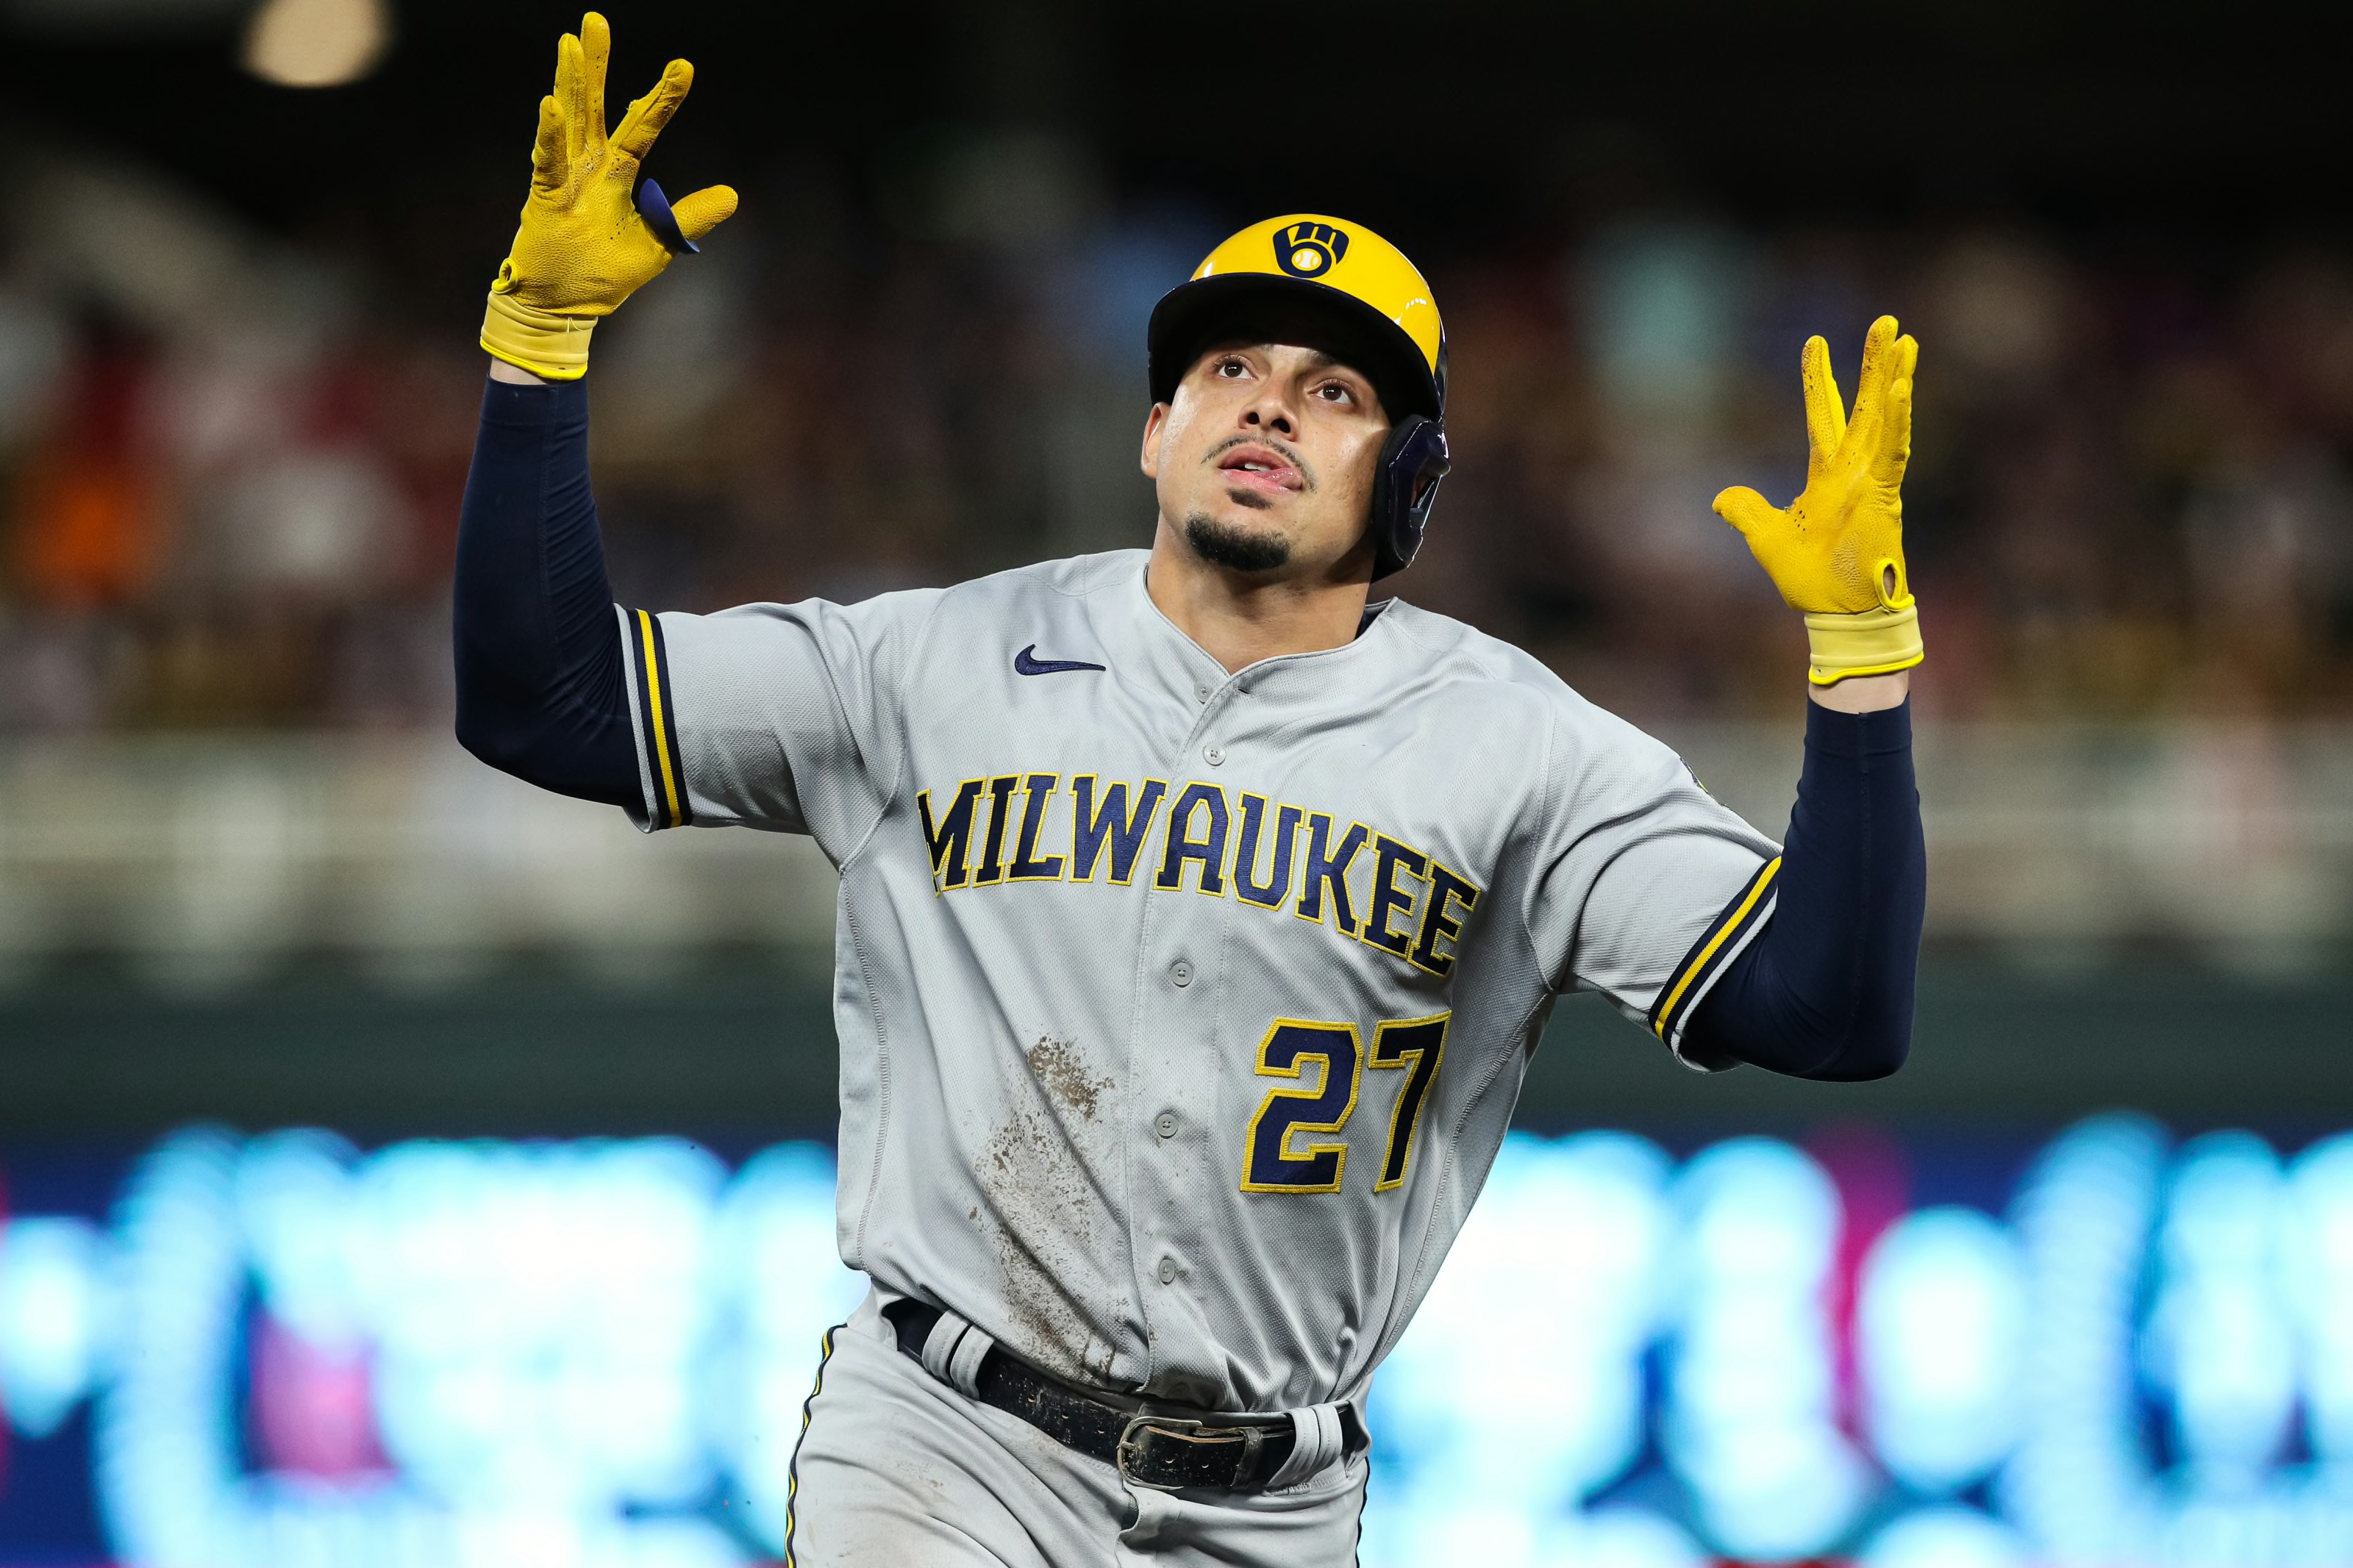 MLB realignment,,Willy Adames #27 of the Milwaukee Brewers celebrates his two-run home run as he rounds the bases against the Minnesota Twins